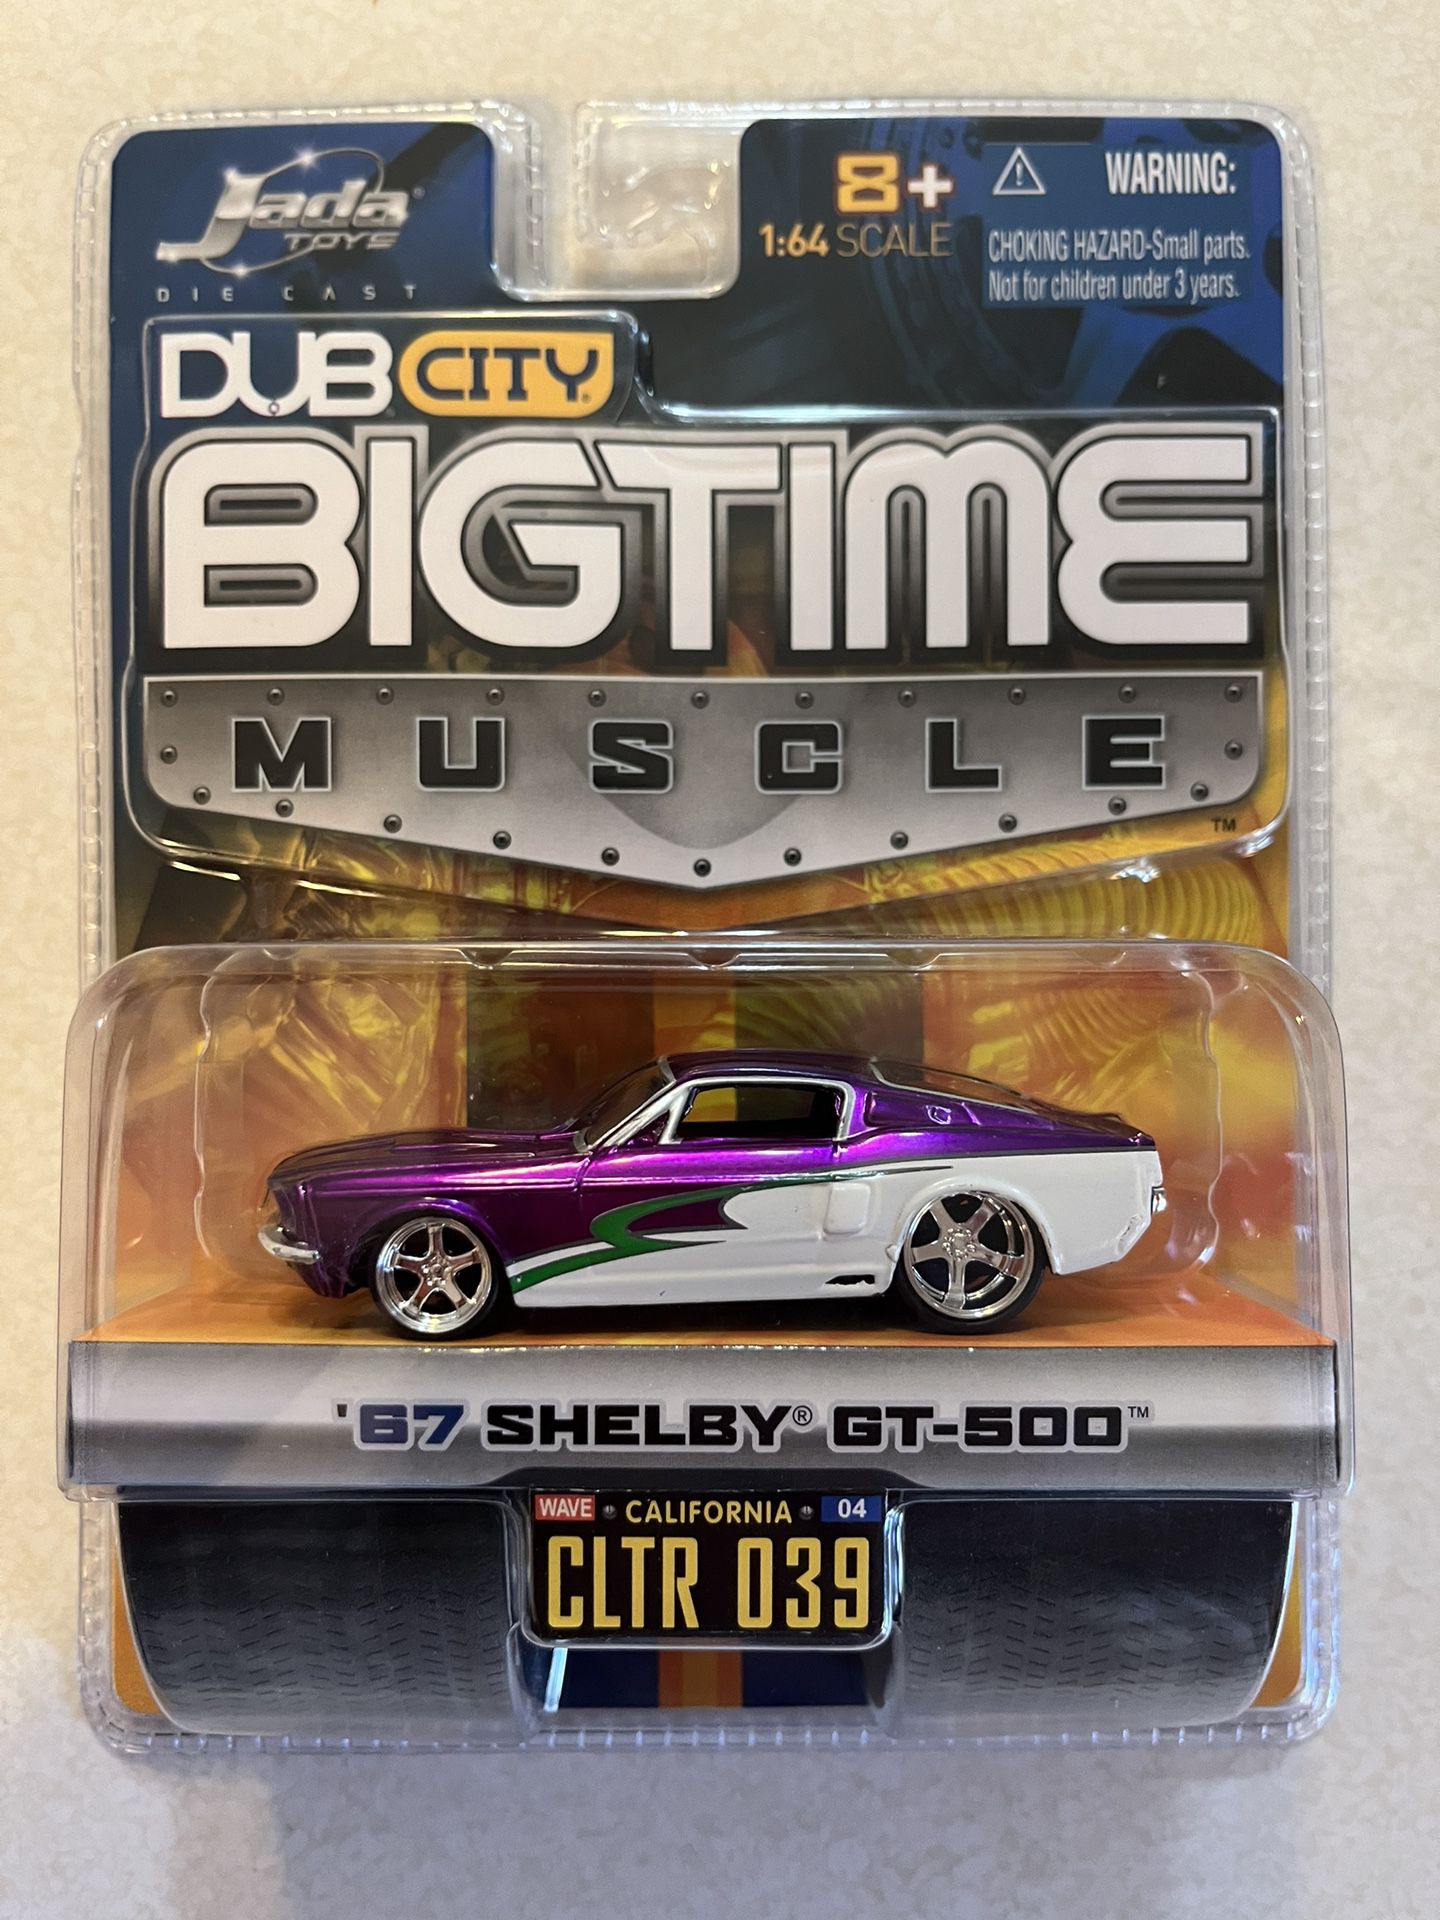 1967 Shelby Mustang GT-500 Dub City Big Time 1:64 Collectible Die Cast Car